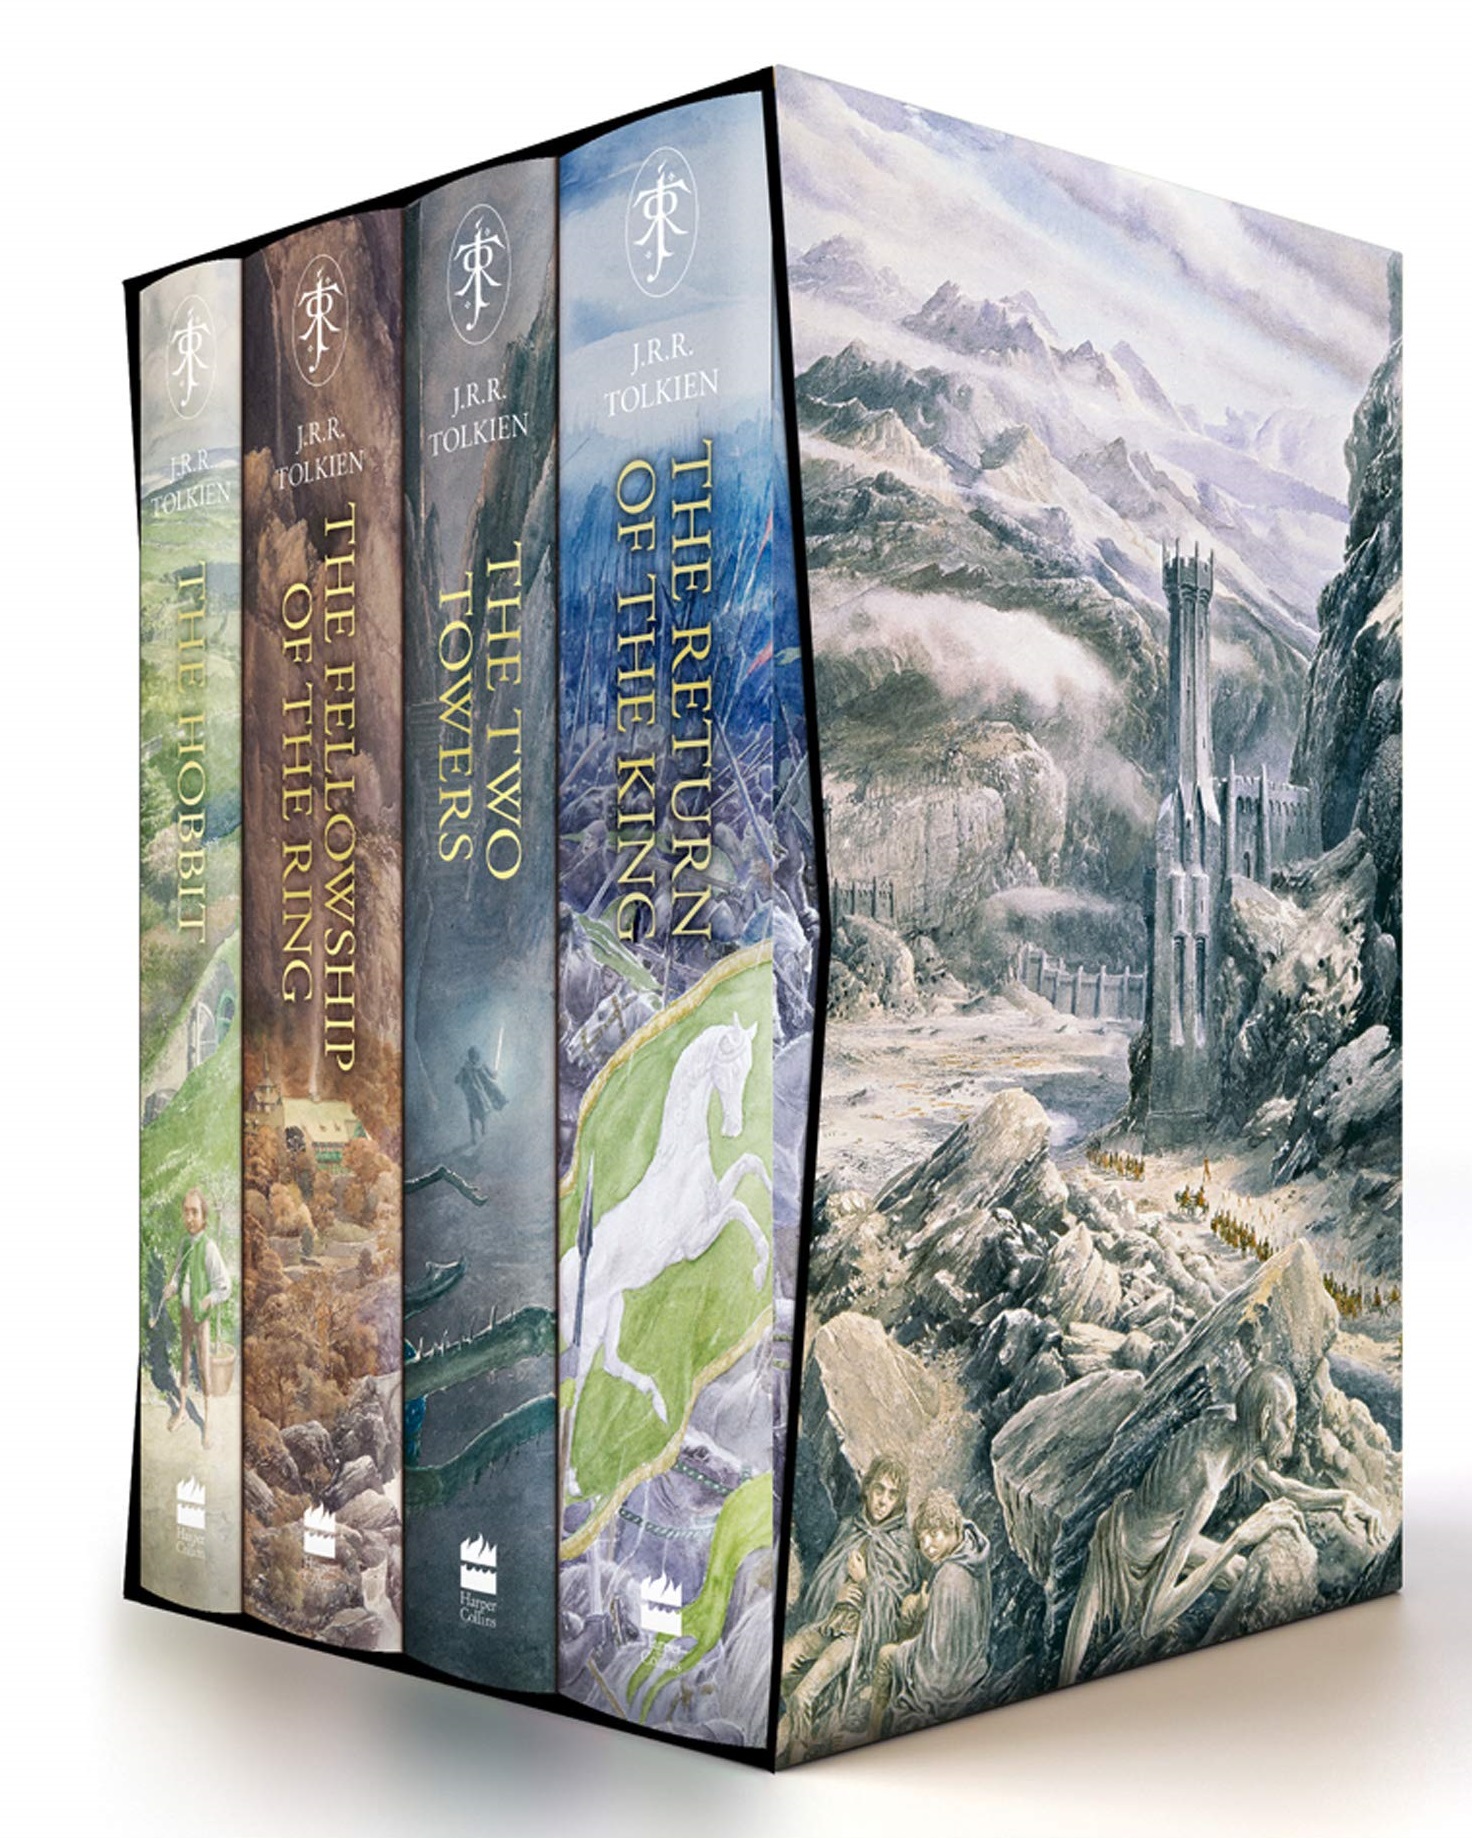 lord of the rings box set